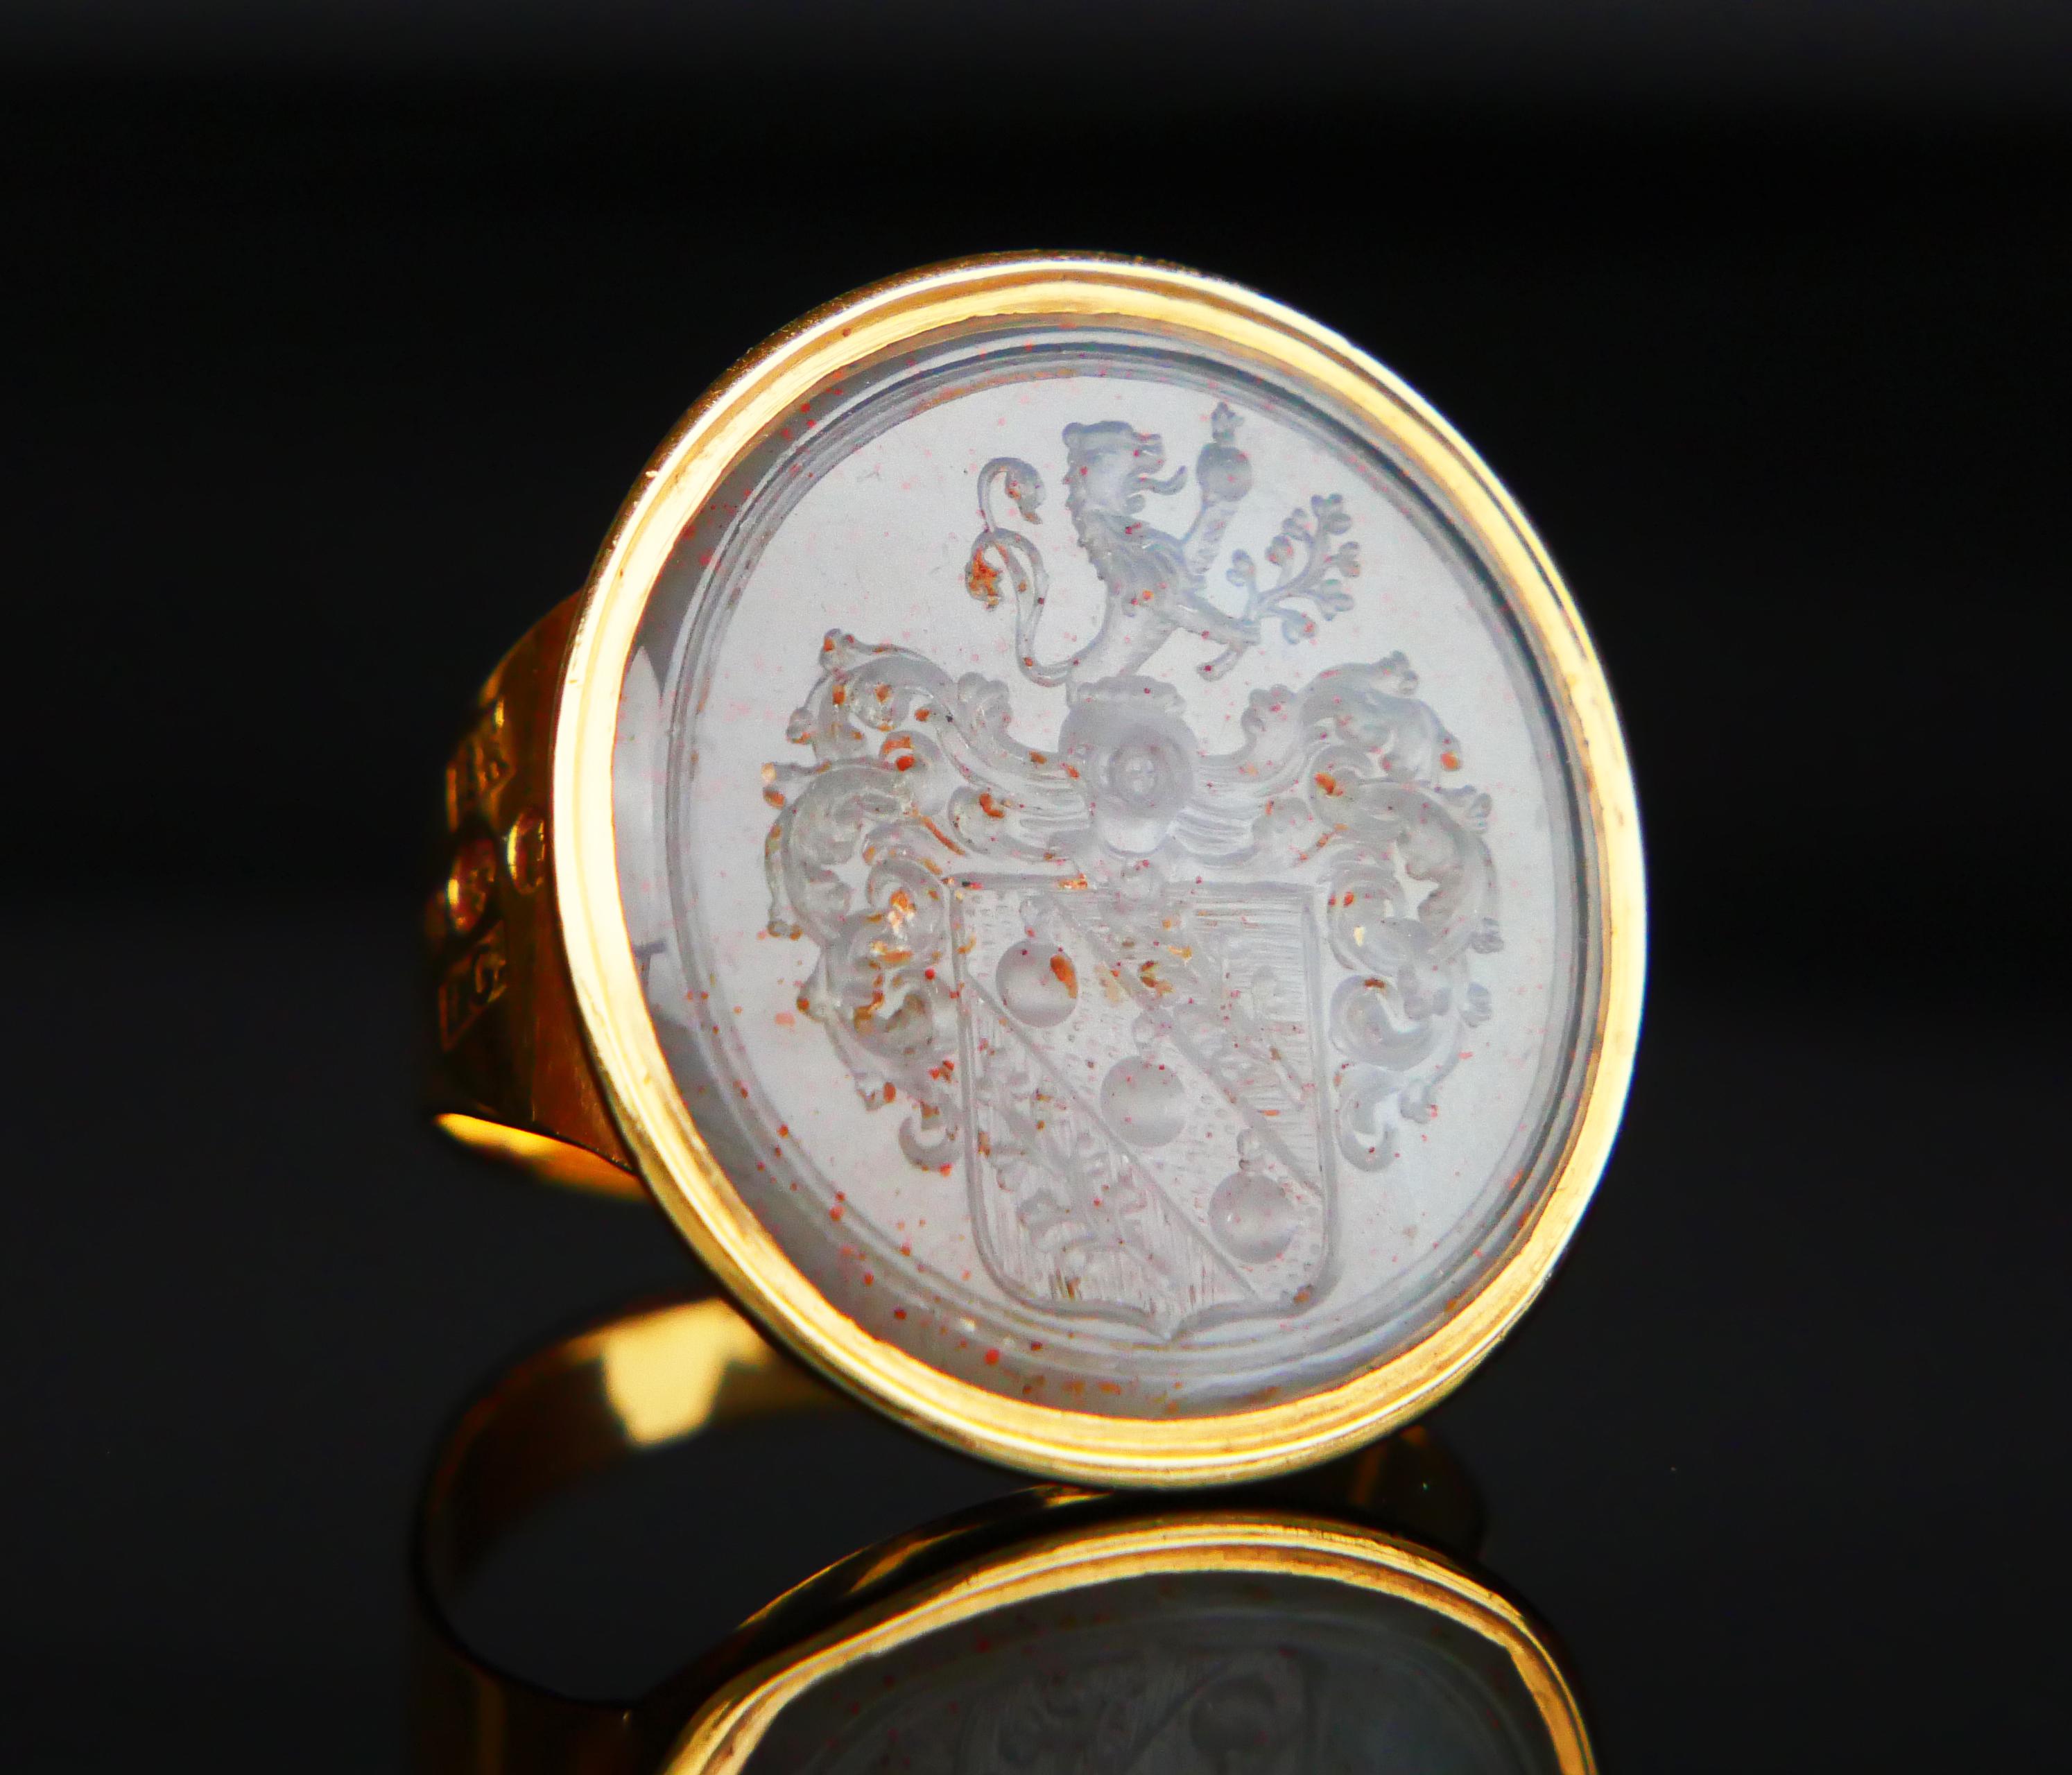 195 years old Signet Intaglio Ring featuring a natural red- spotted Gray - Blue Sardonyx stone with hand-cut heraldic depiction of three smoking Grenades flanked with Lilies on the shield under a Knight's Helmet lavishly decorated with plumage. On